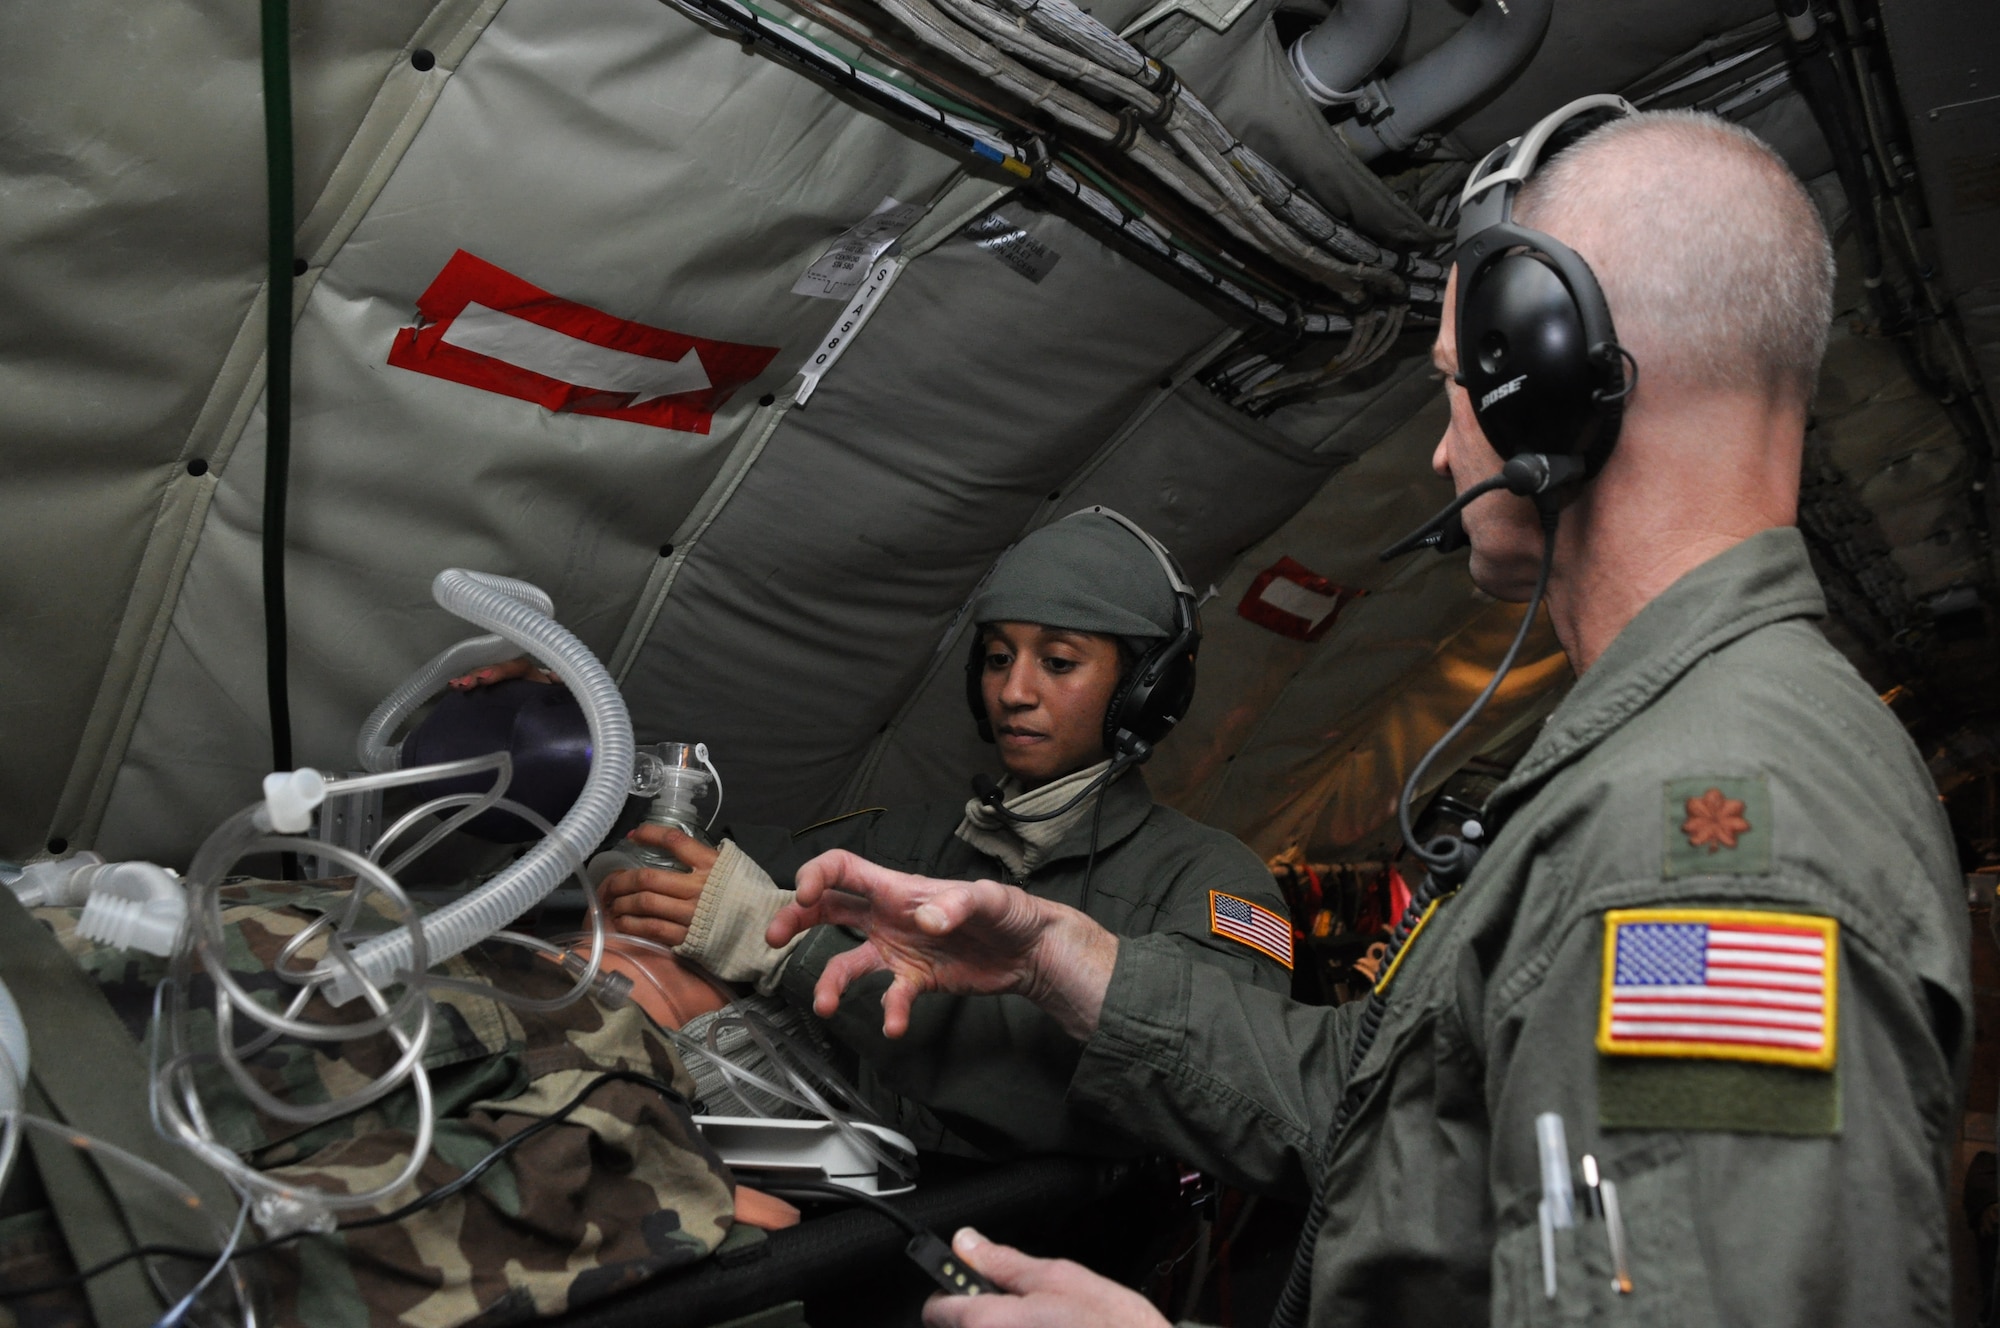 Maj. Patrick Falvey shows Senior Airman Jasmine Simms, Critical Care Air Transport Team members with the 459th Aeromedical Staging Squadron at Joint Base Andrews, Md., how to properly place a breathing bag on a patient during a training mission to Texas and California, March 22, 2013. The CCATT teamed up with the 459th Aeromedical Evacuation Squadron to get experience working together and to learn the ins and outs of taking care of patients while airborne. The two teams fly together once every three months. (U.S. Air Force photo/ Staff Sgt. Katie Spencer)